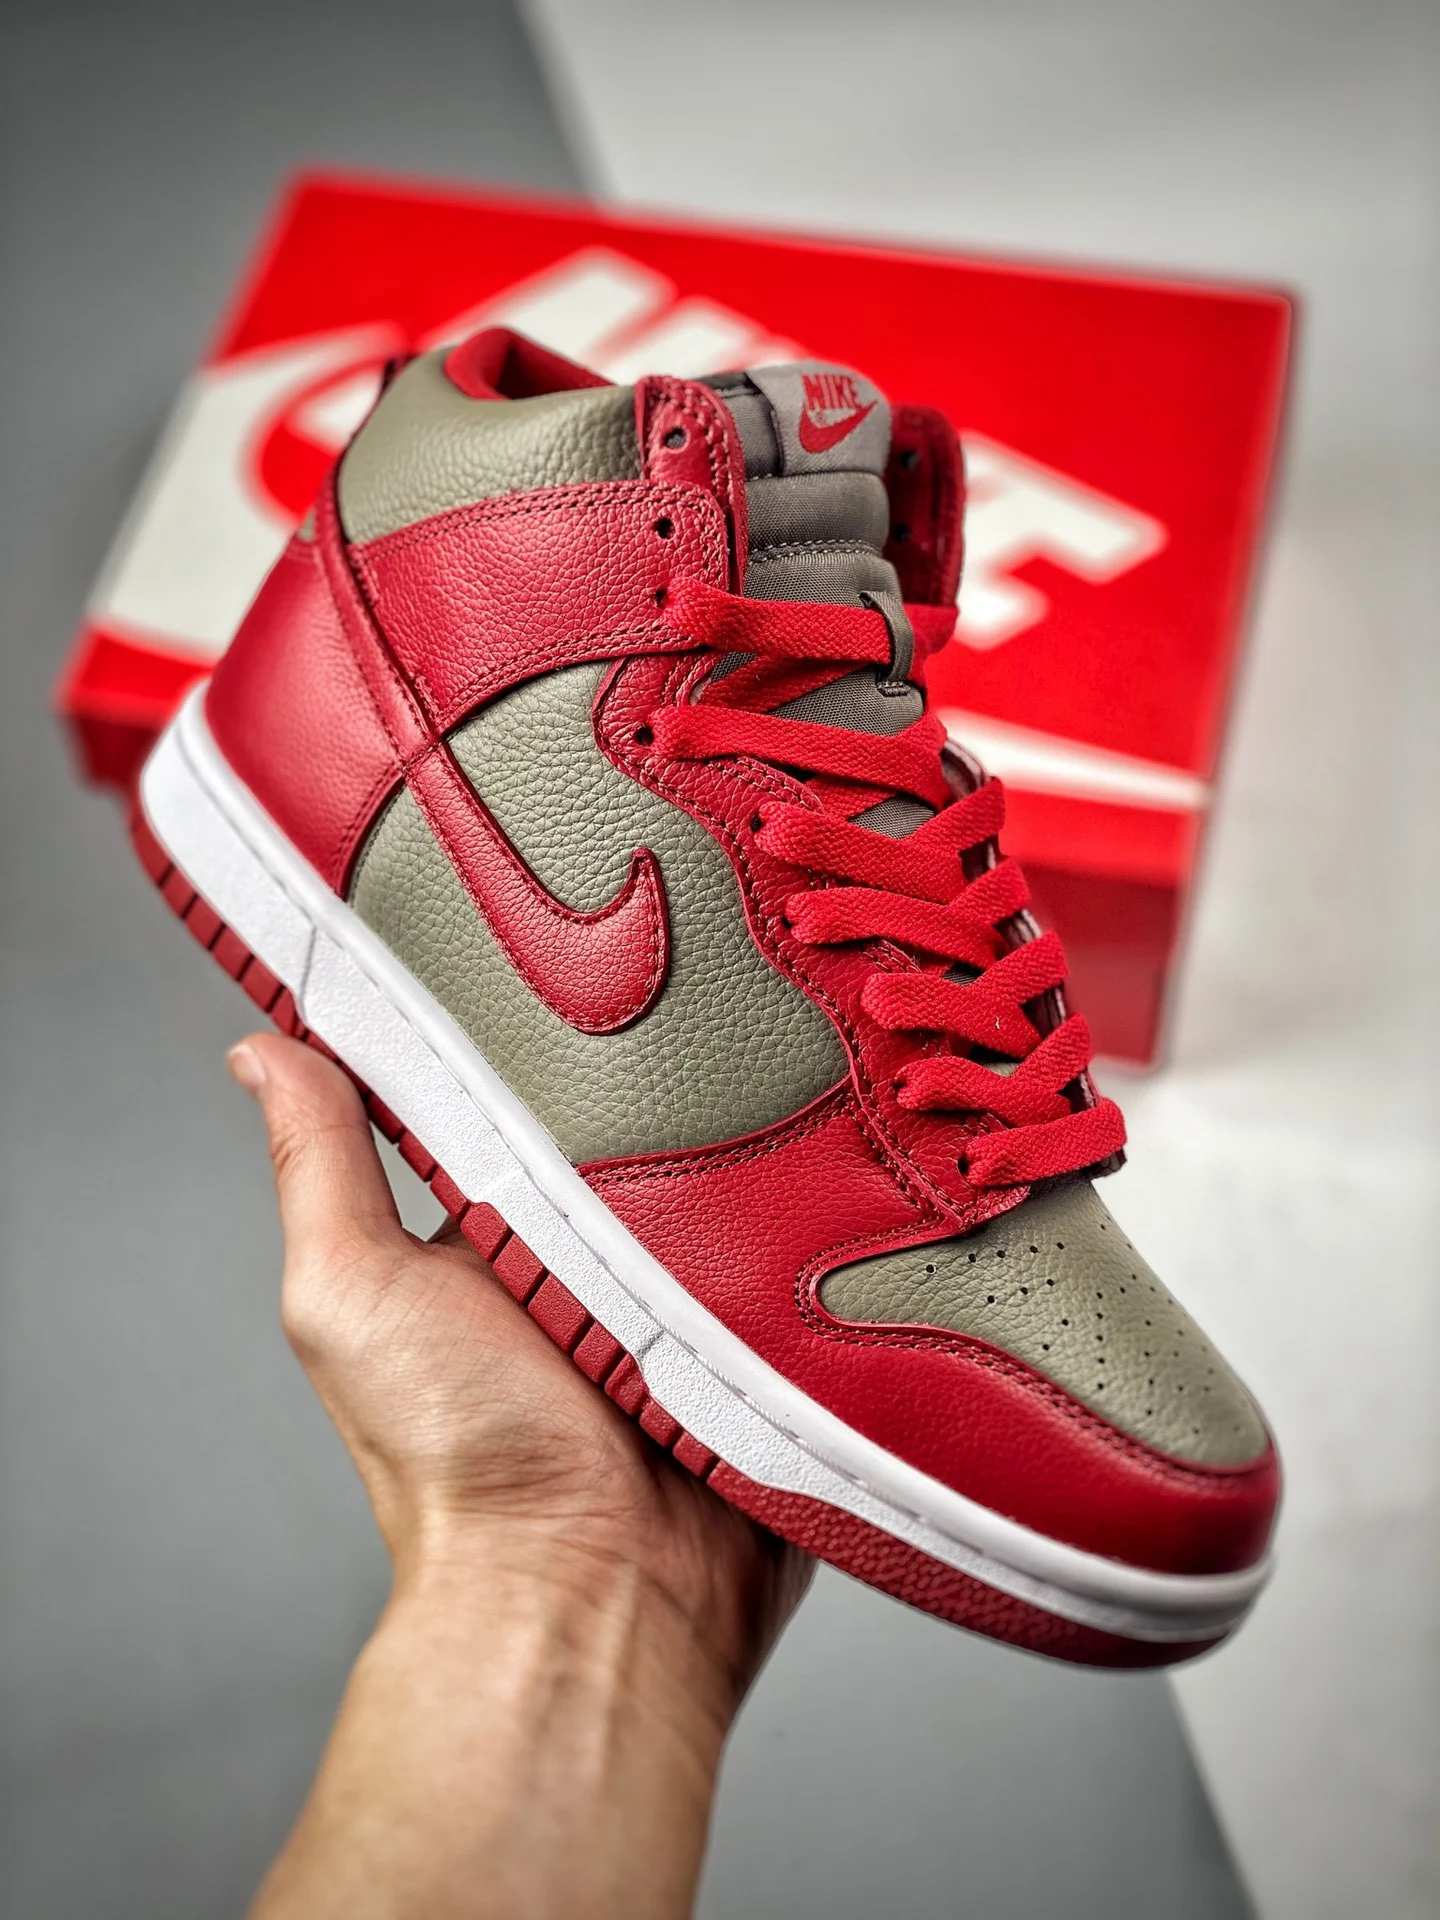 Nike Dunk High UNLV Soft Grey University Red 850477-001 For Sale